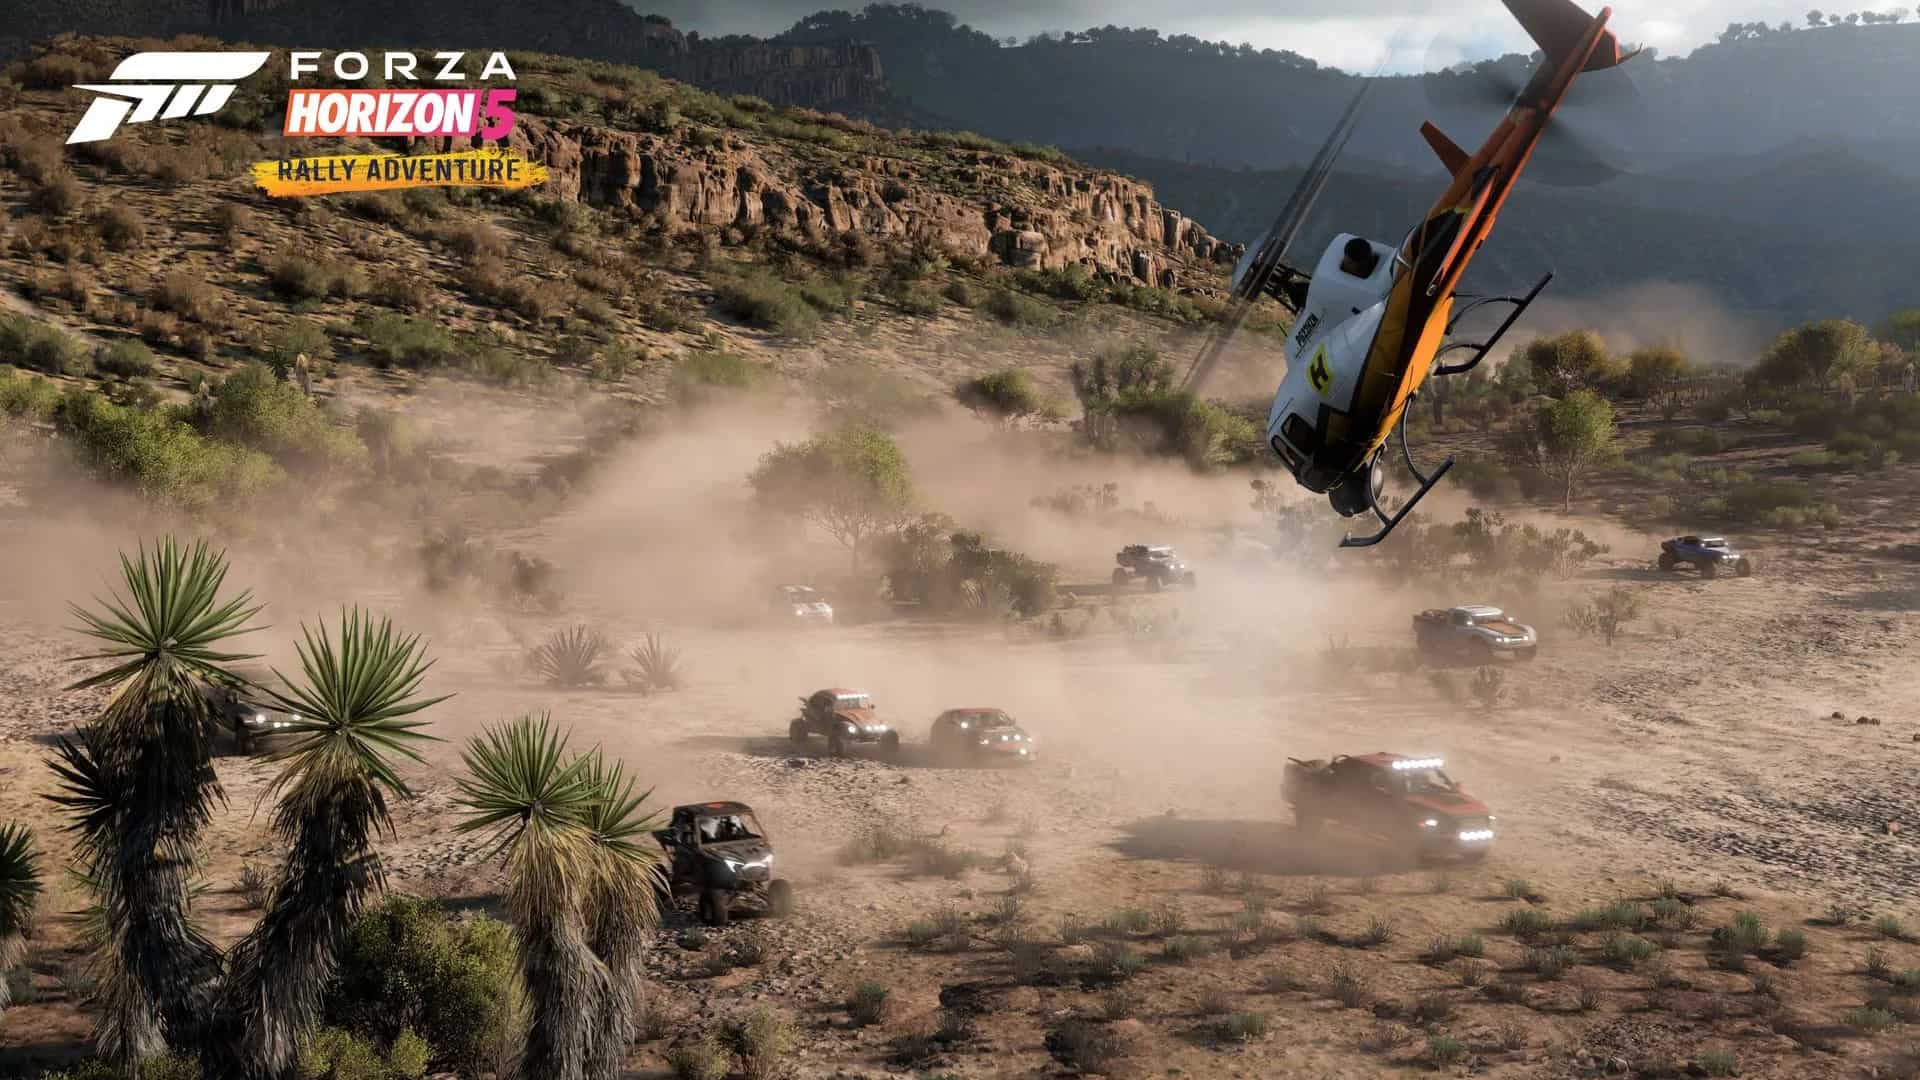 How to access Forza Horizon 5's Rally Adventure Expansion DLC